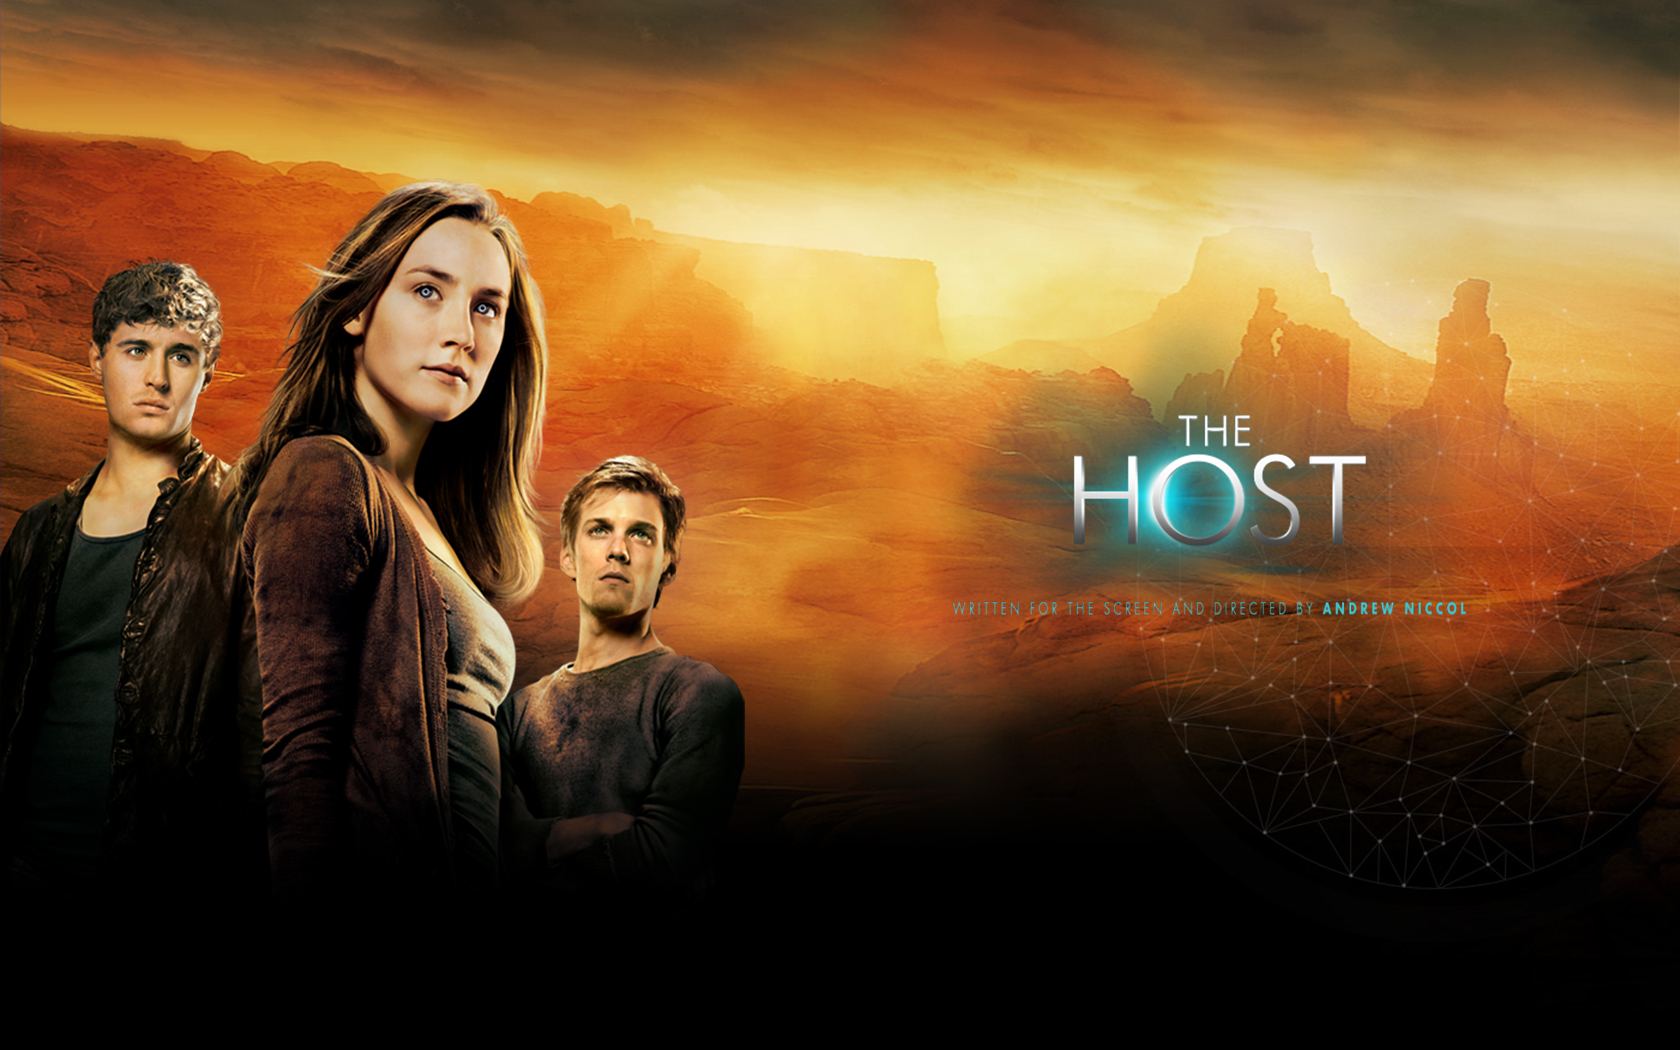 Movie The Host (2013) HD Wallpaper | Background Image